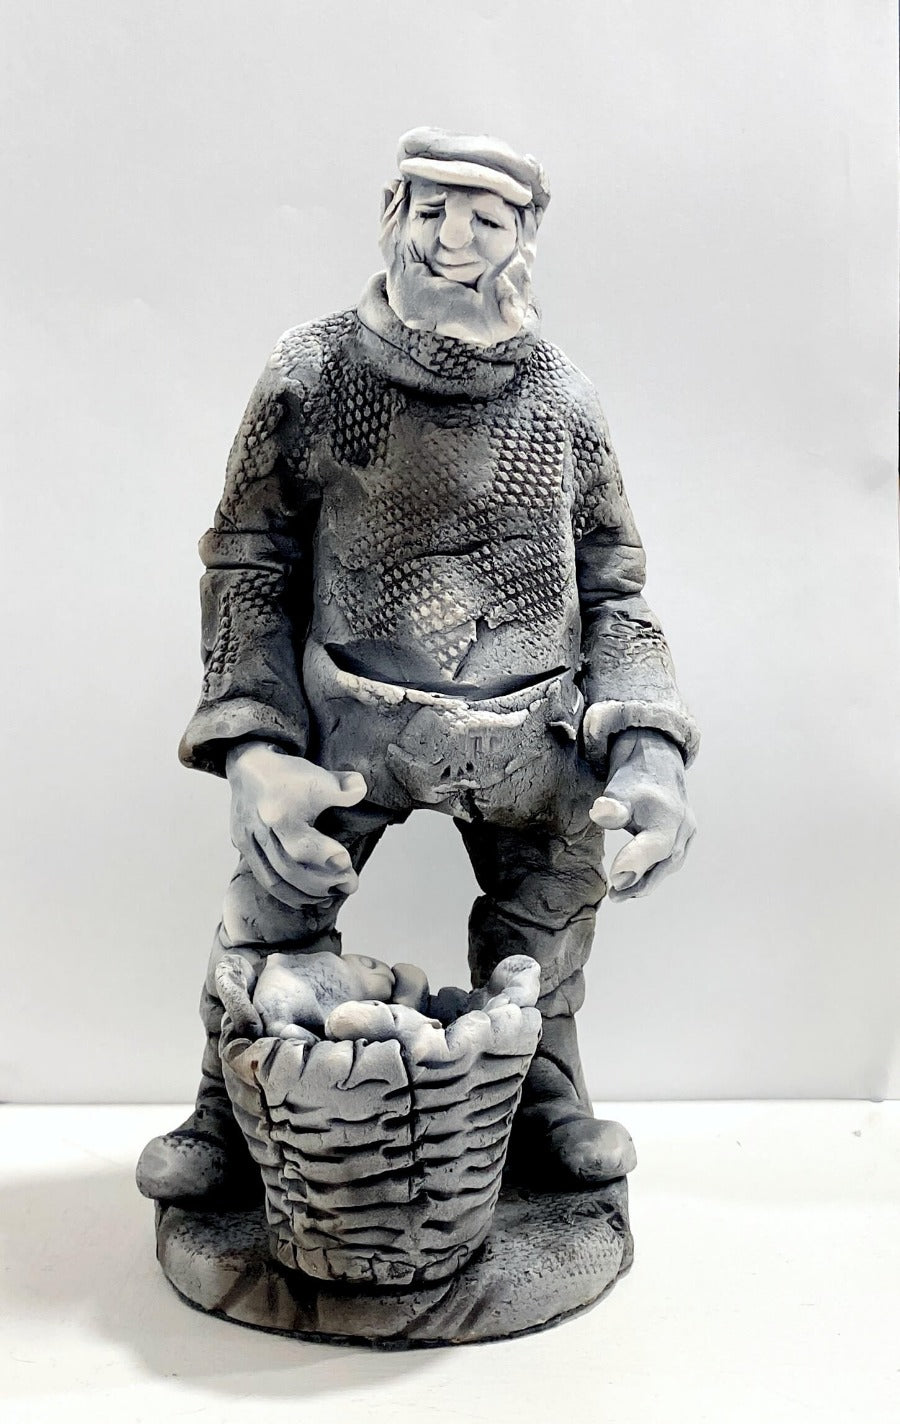 Large Standing Fisherman by Alistair Brooks | Contemporary Sculpture for sale by Alistair Brooks at The Biscuit Factory Newcastle